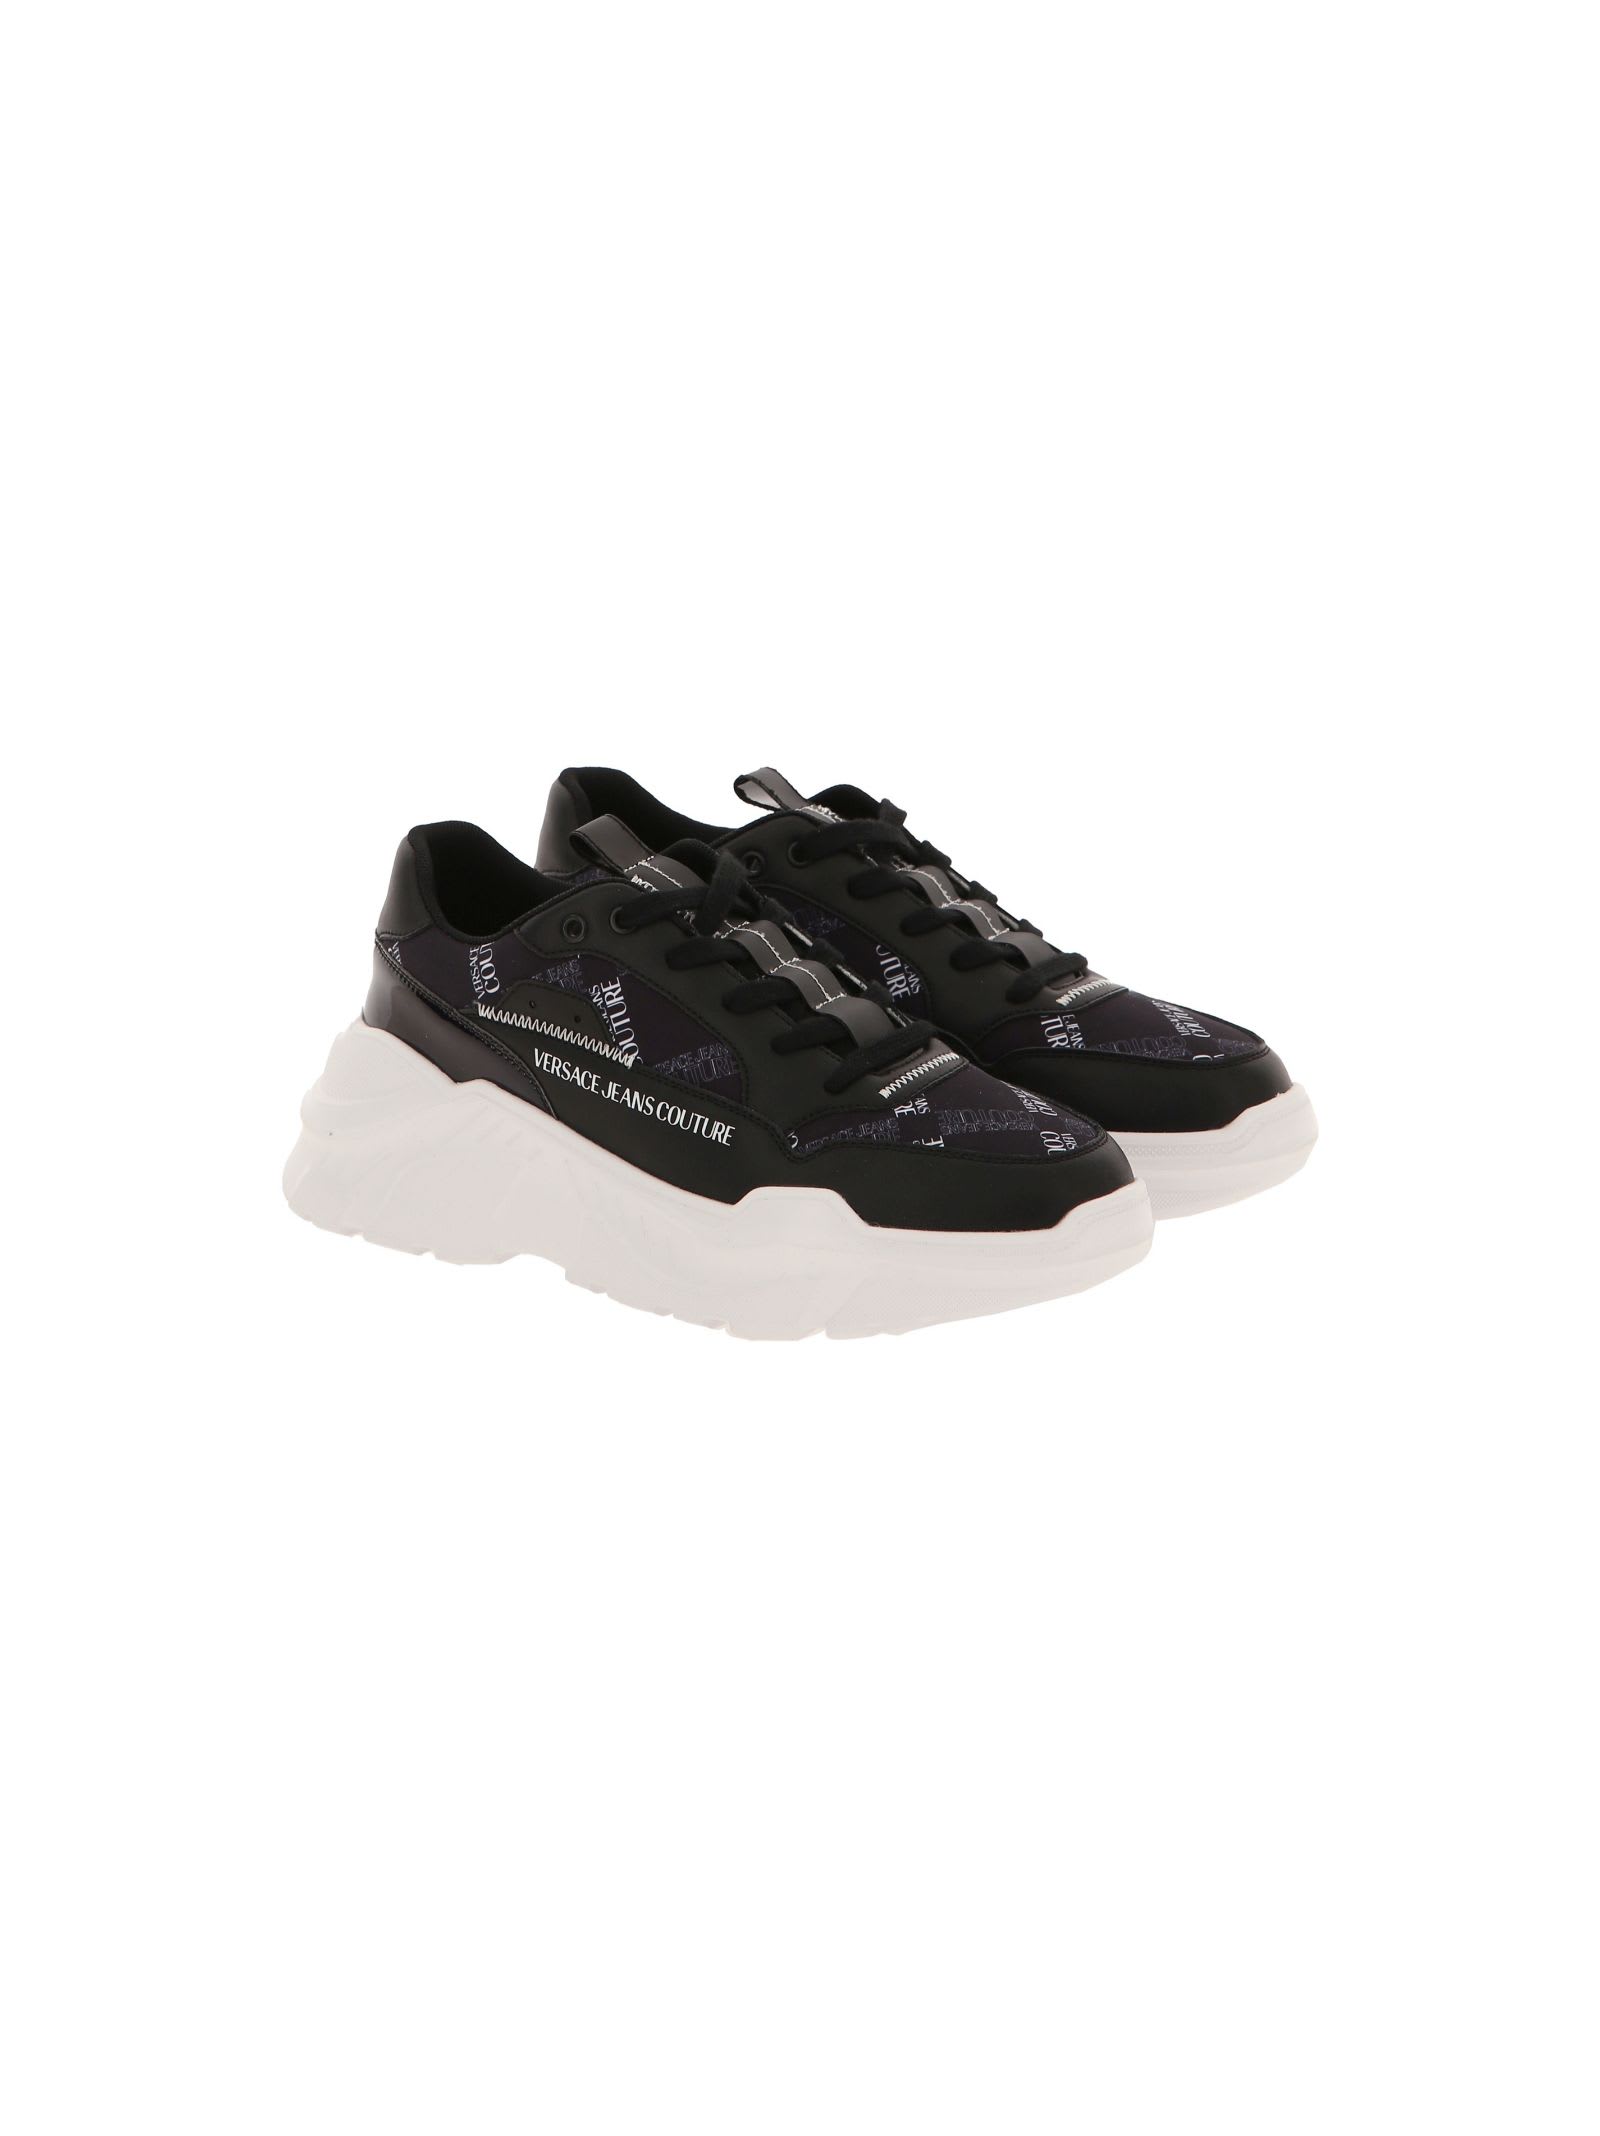 Versace Jeans Couture Sneakers In Black/white